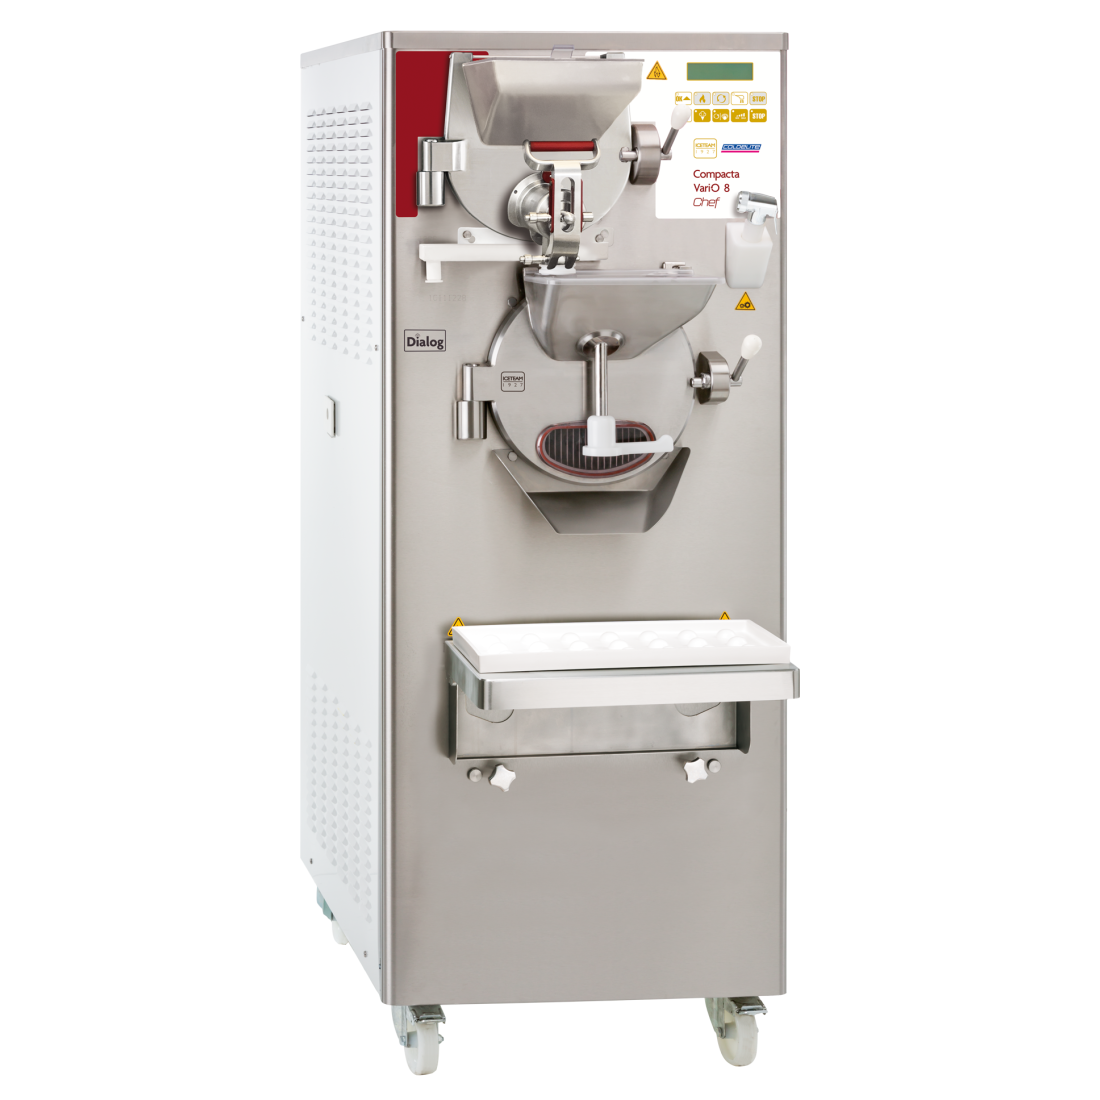 ICETEAM COMPACTA 8 SILVER VARIO COMBINED BATCH FREEZER|mkayn|مكاين